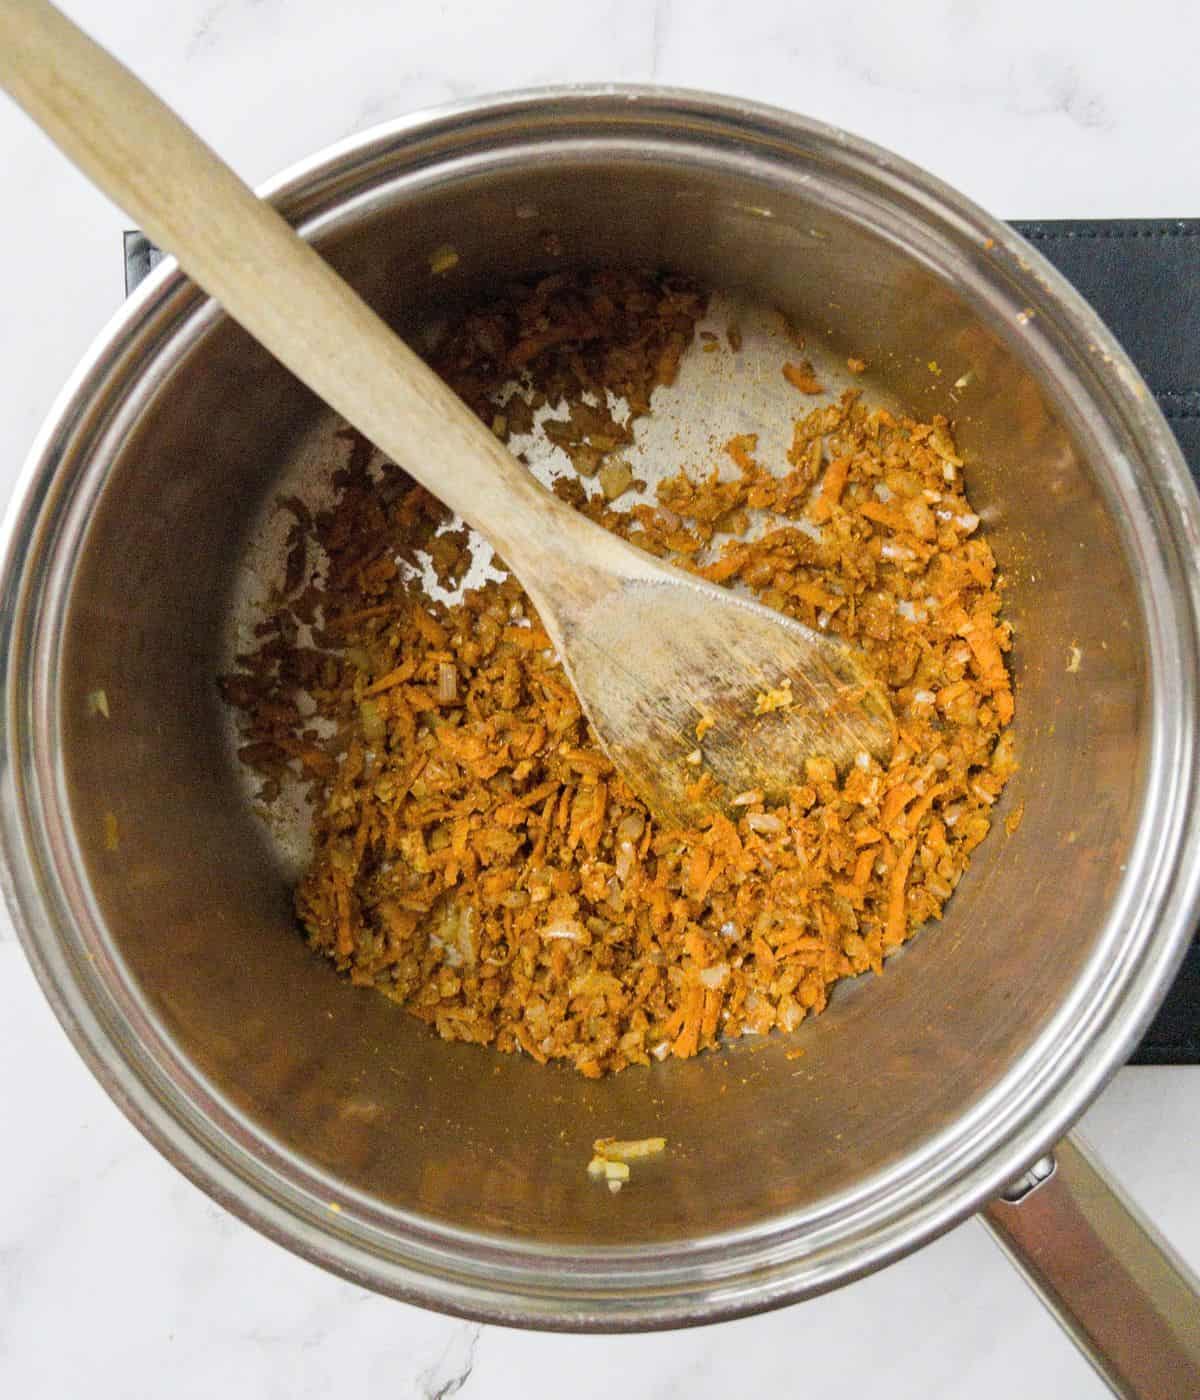 chopped onion, carrots and spices being stirred in a saucepan.